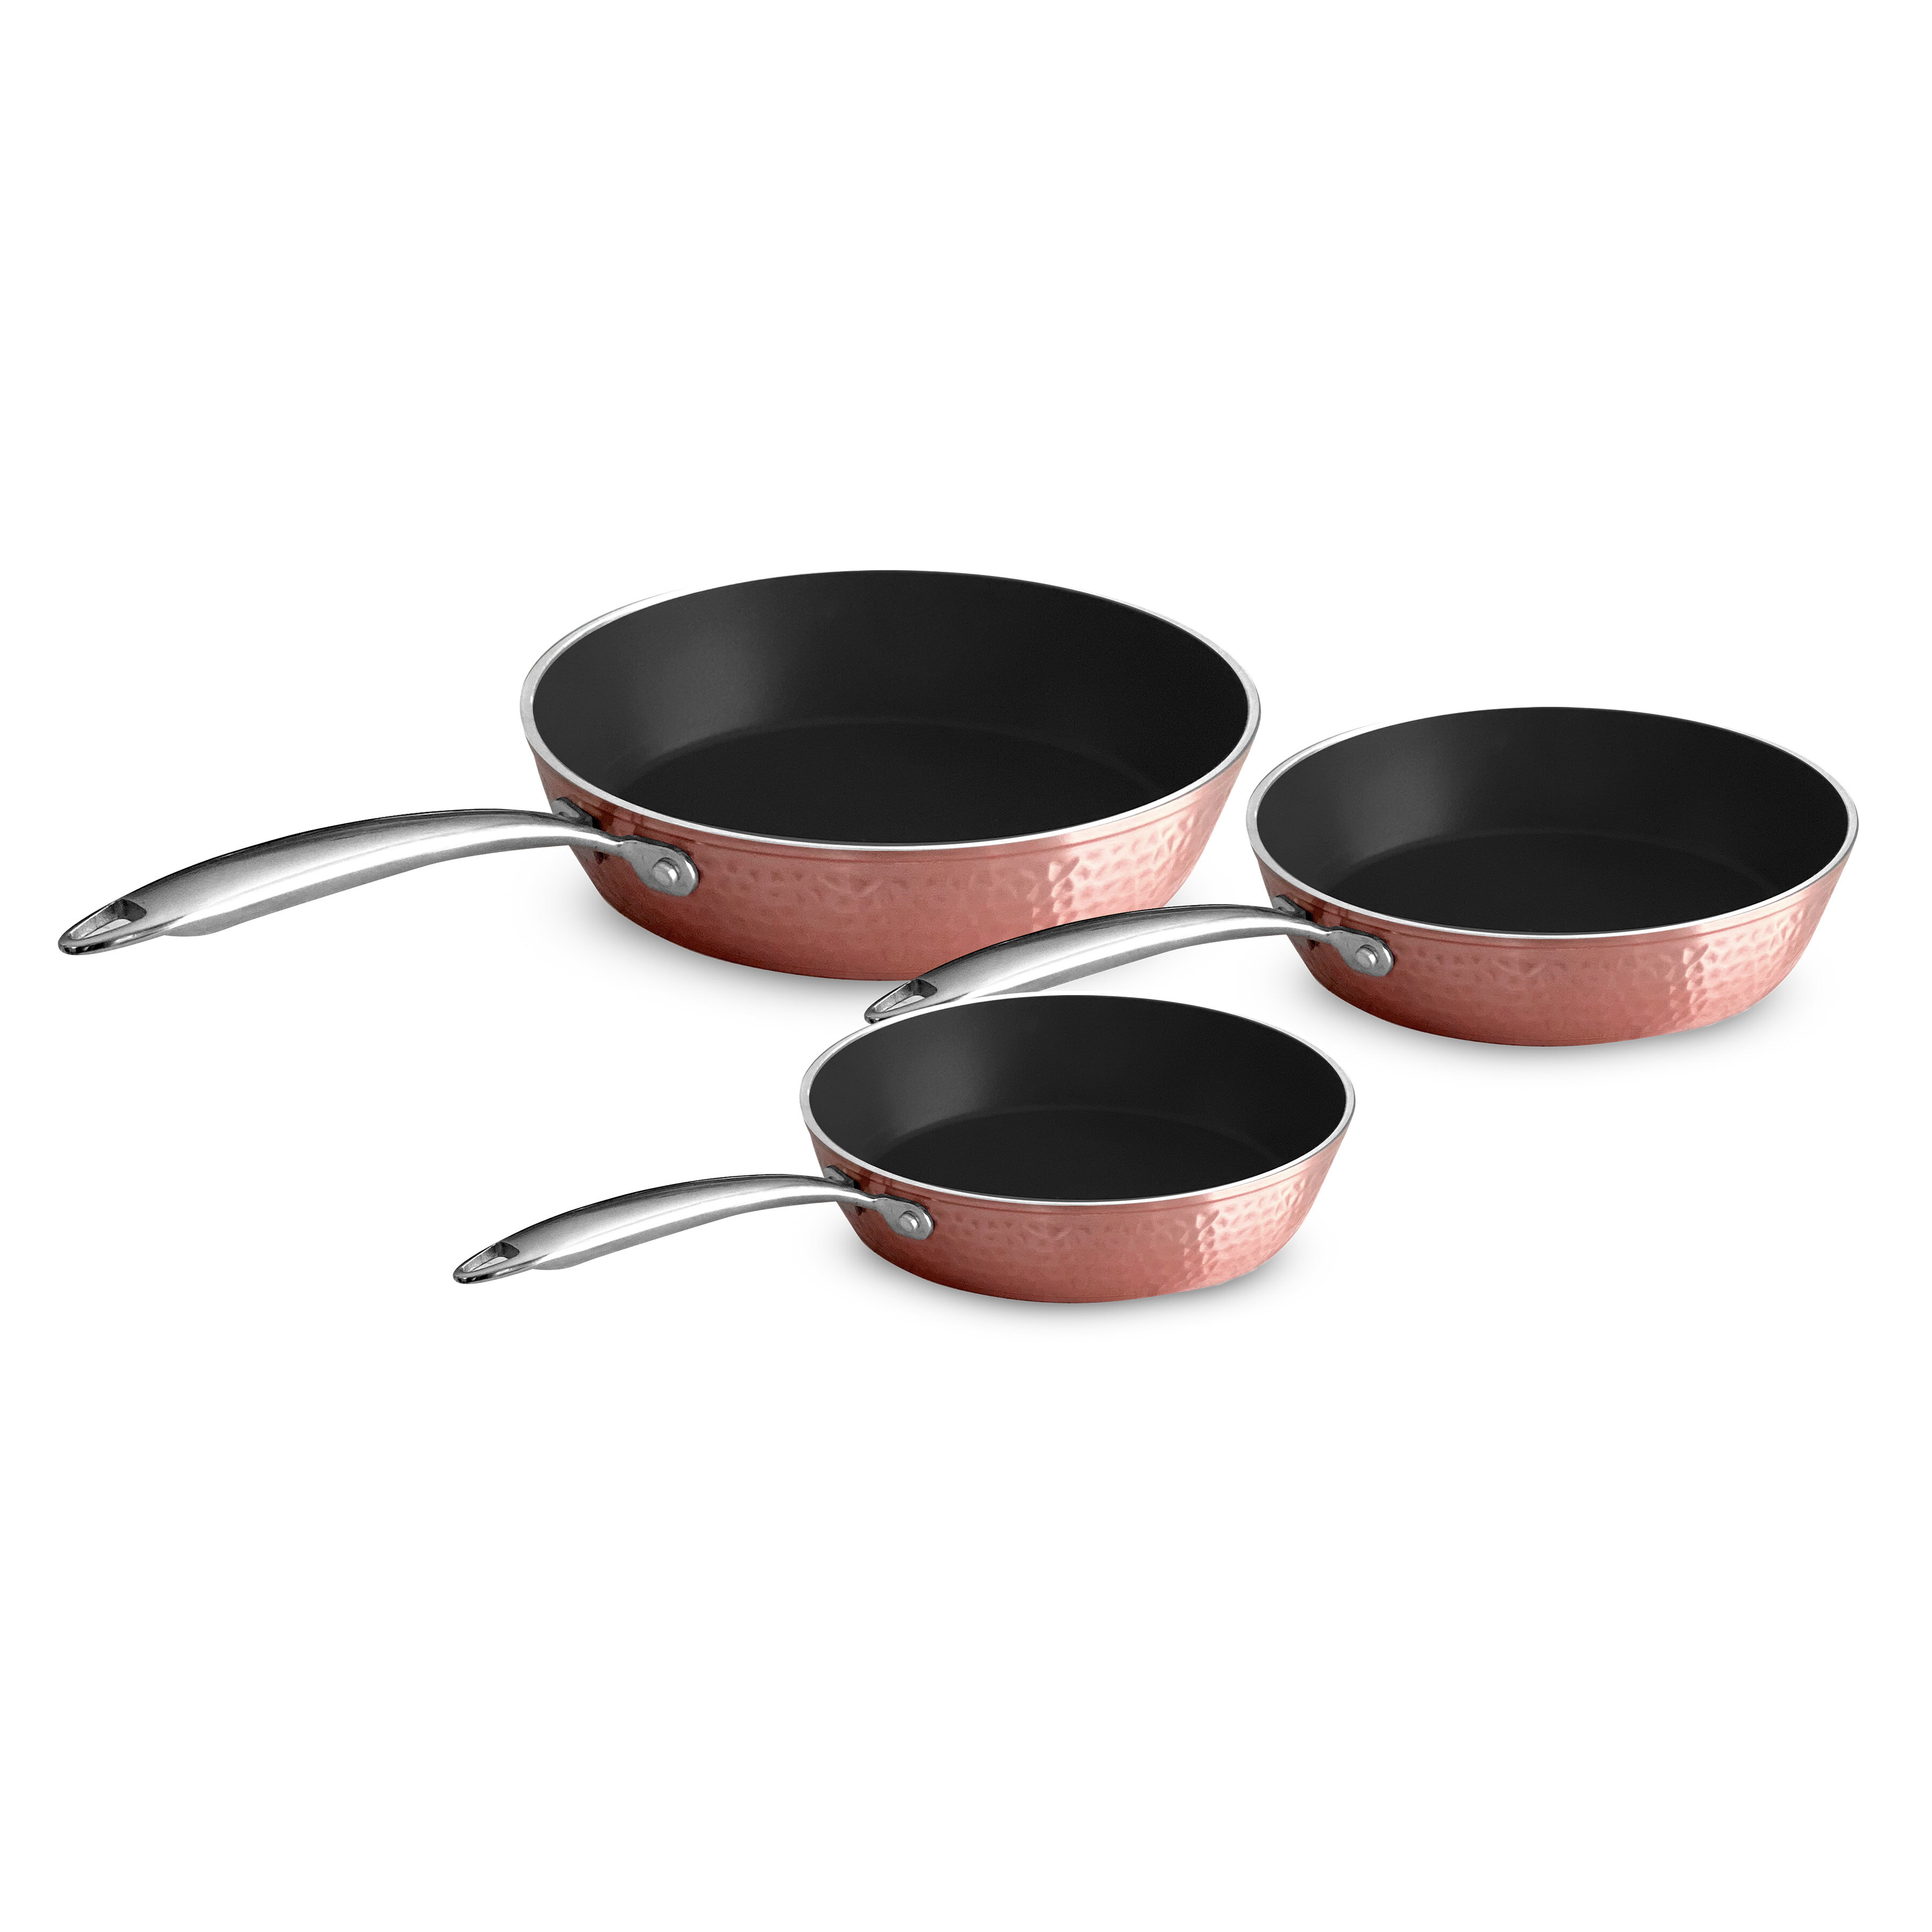 Cookware Toxin Free Ceramic Nonstick Safe Open Frypan Frying Pan 10 3 Sets